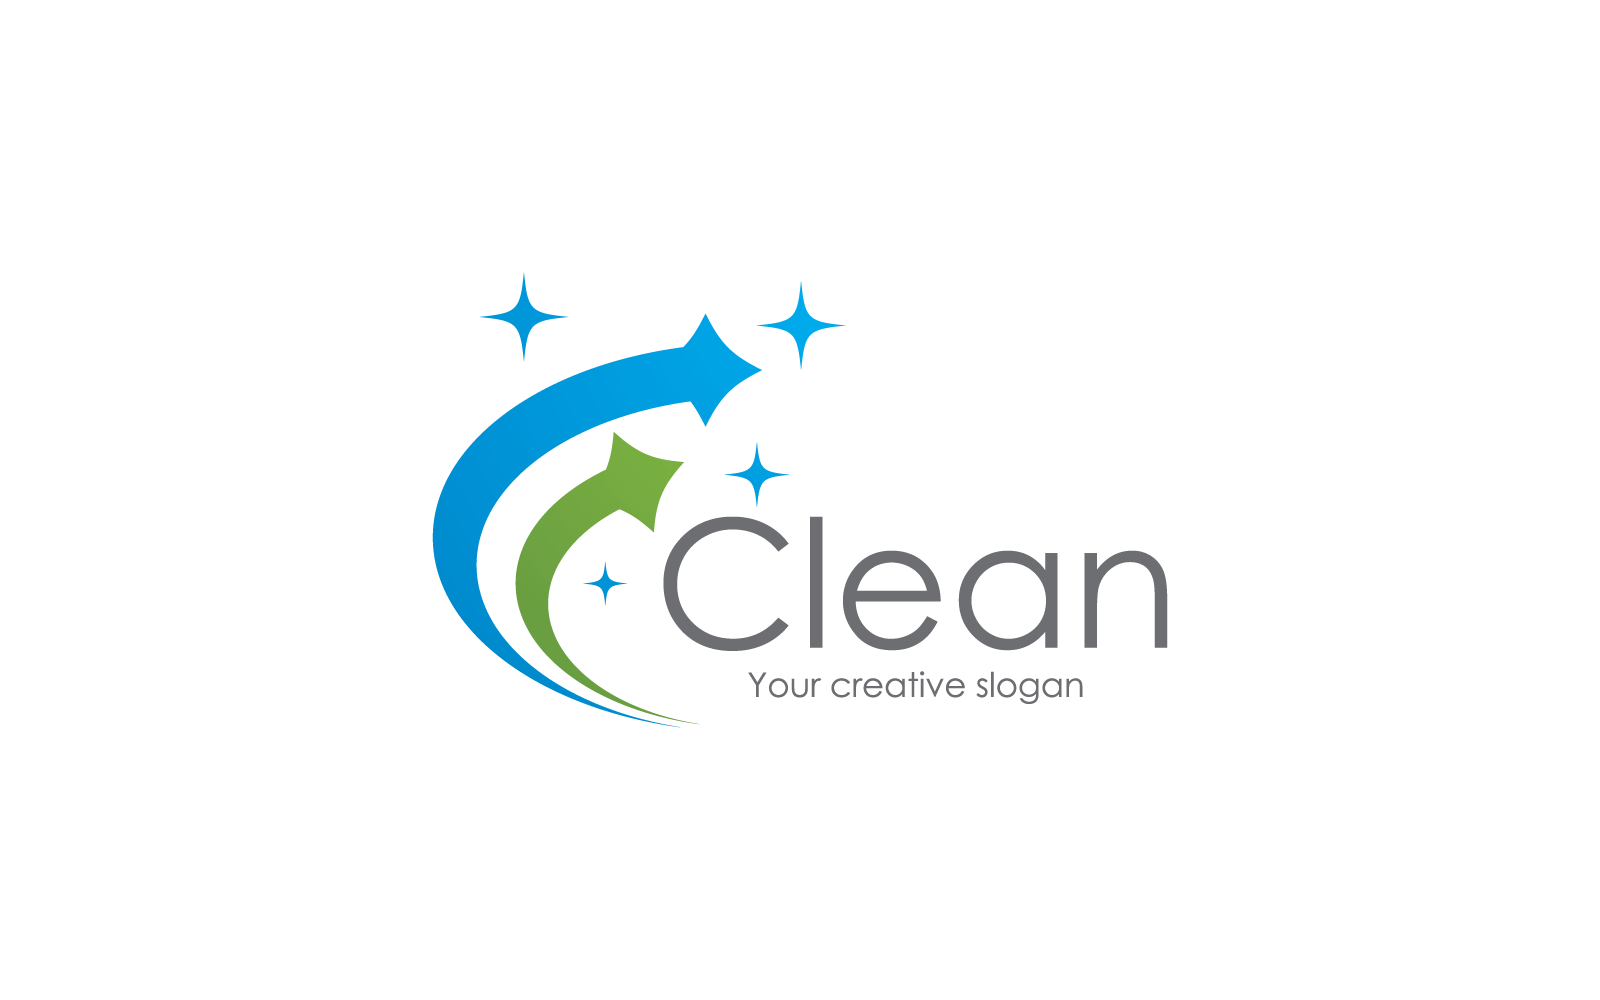 Cleaning logo and symbol design vector template